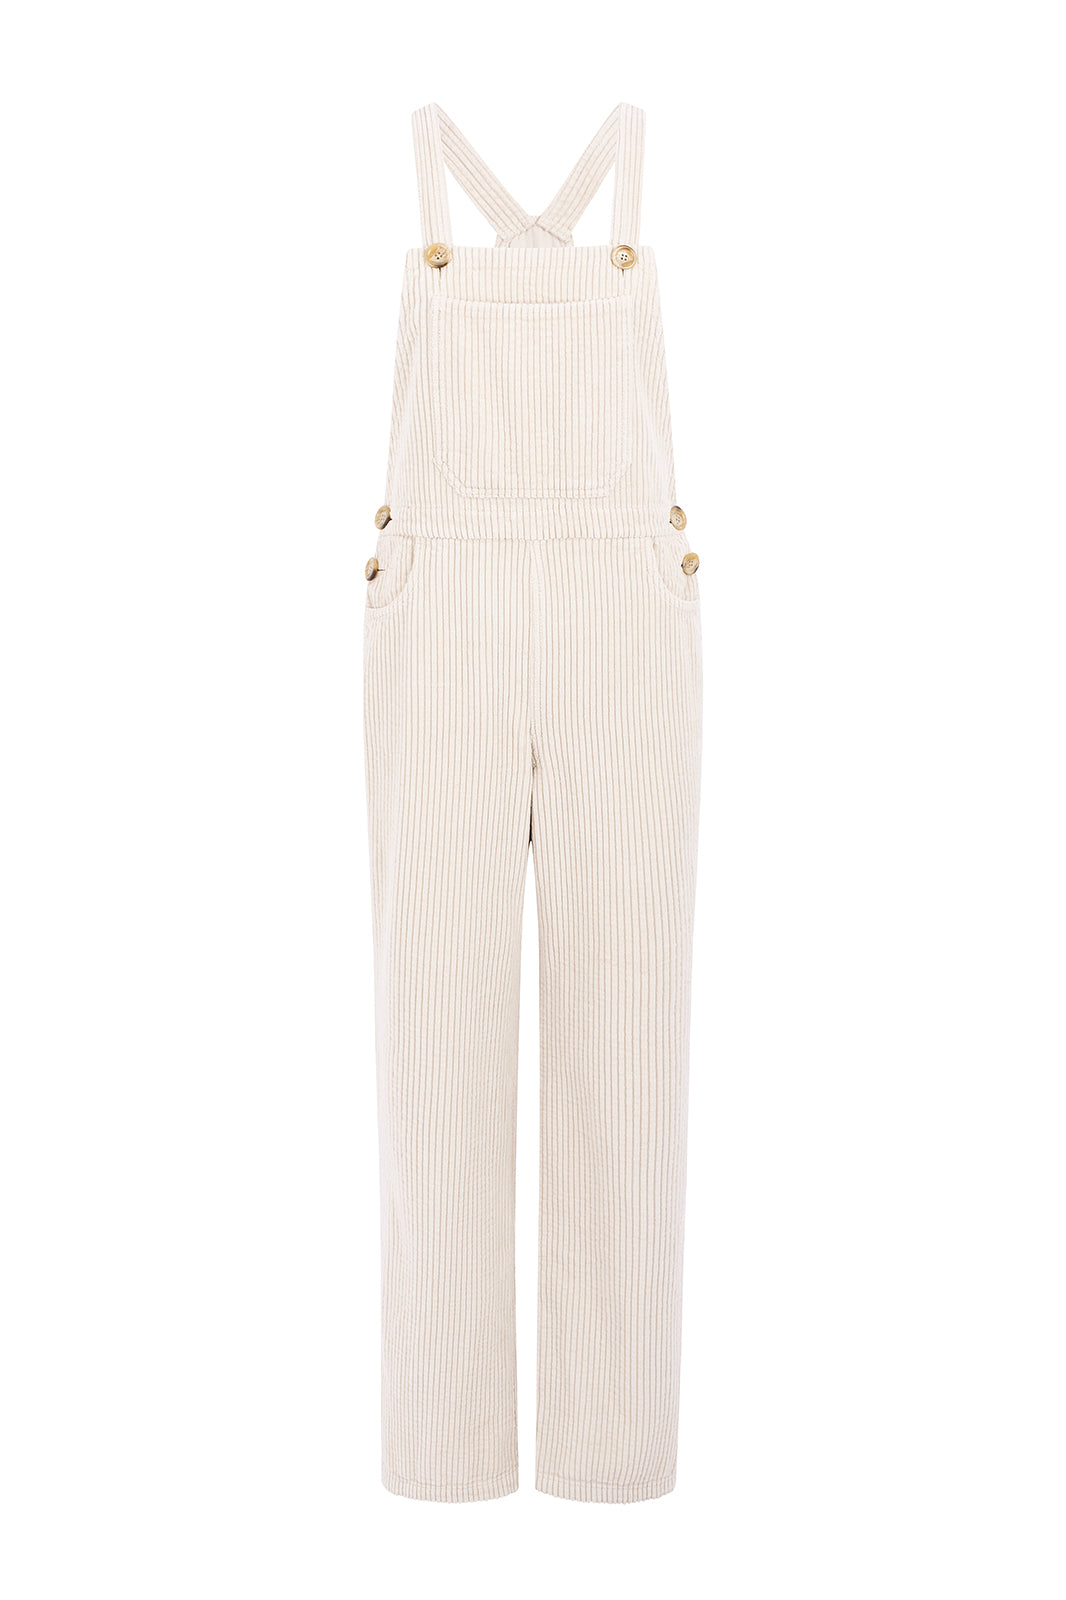 Naz women's corduroy overalls in white with elastic on the back.